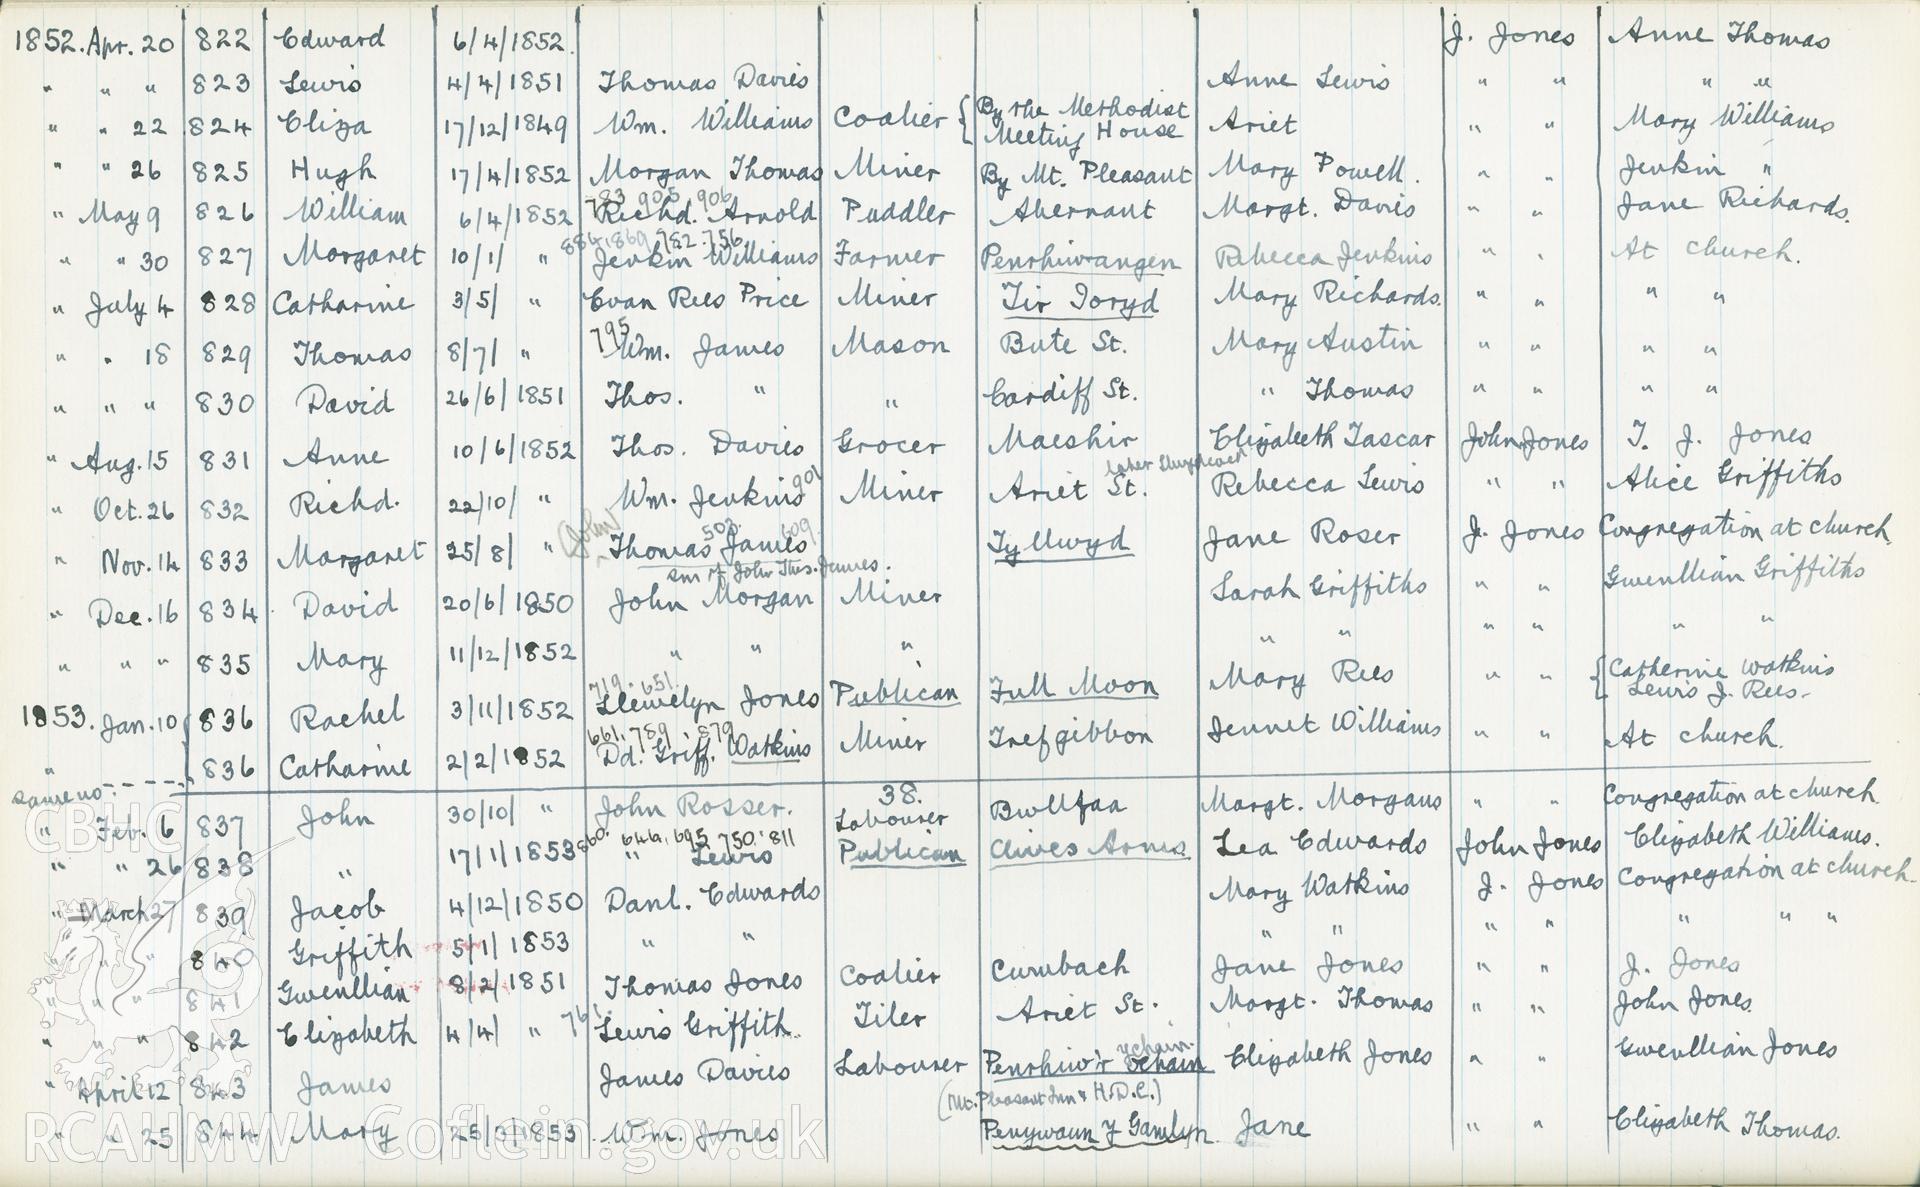 "Baptism Registered" book for Hen Dy Cwrdd, made between April 19th and 28th, 1941, by W. W. Price. Page listing baptisms from 20th April 1852 to 25th April 1853. Donated to the RCAHMW as part of the Digital Dissent Project.